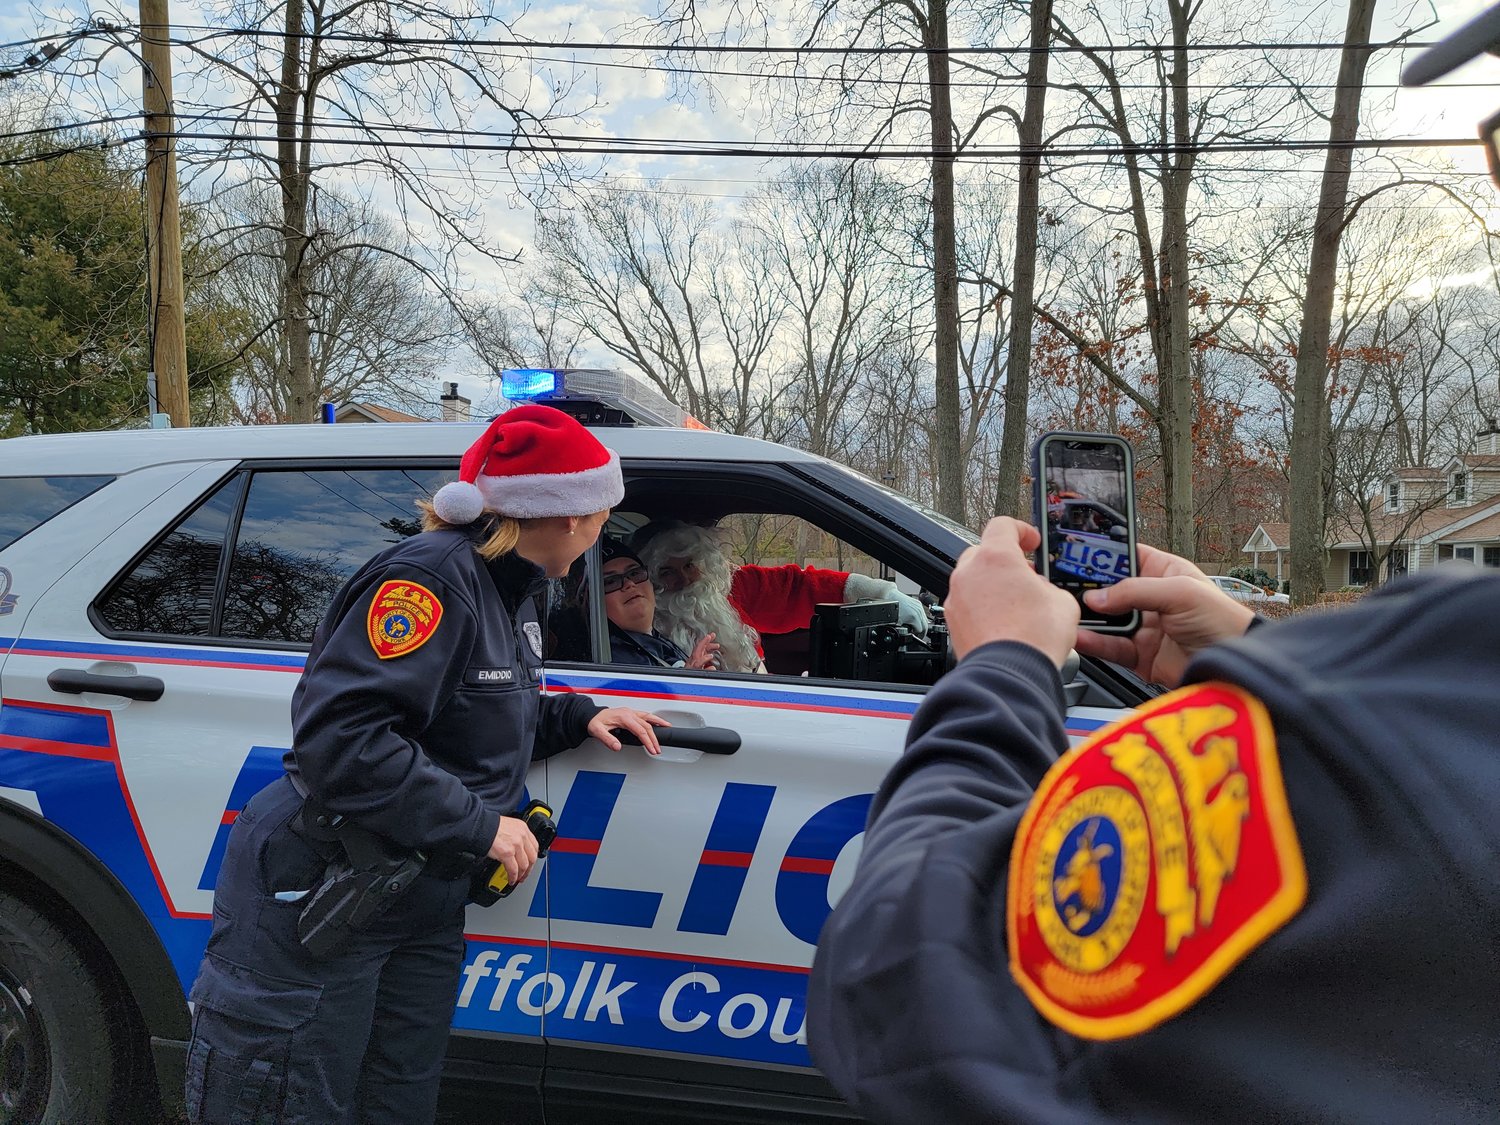 Jacob Slager was all smiles on Thursday, Dec. 16, when his wish was granted by the Suffolk County Police Department to take him to school in a cruiser.